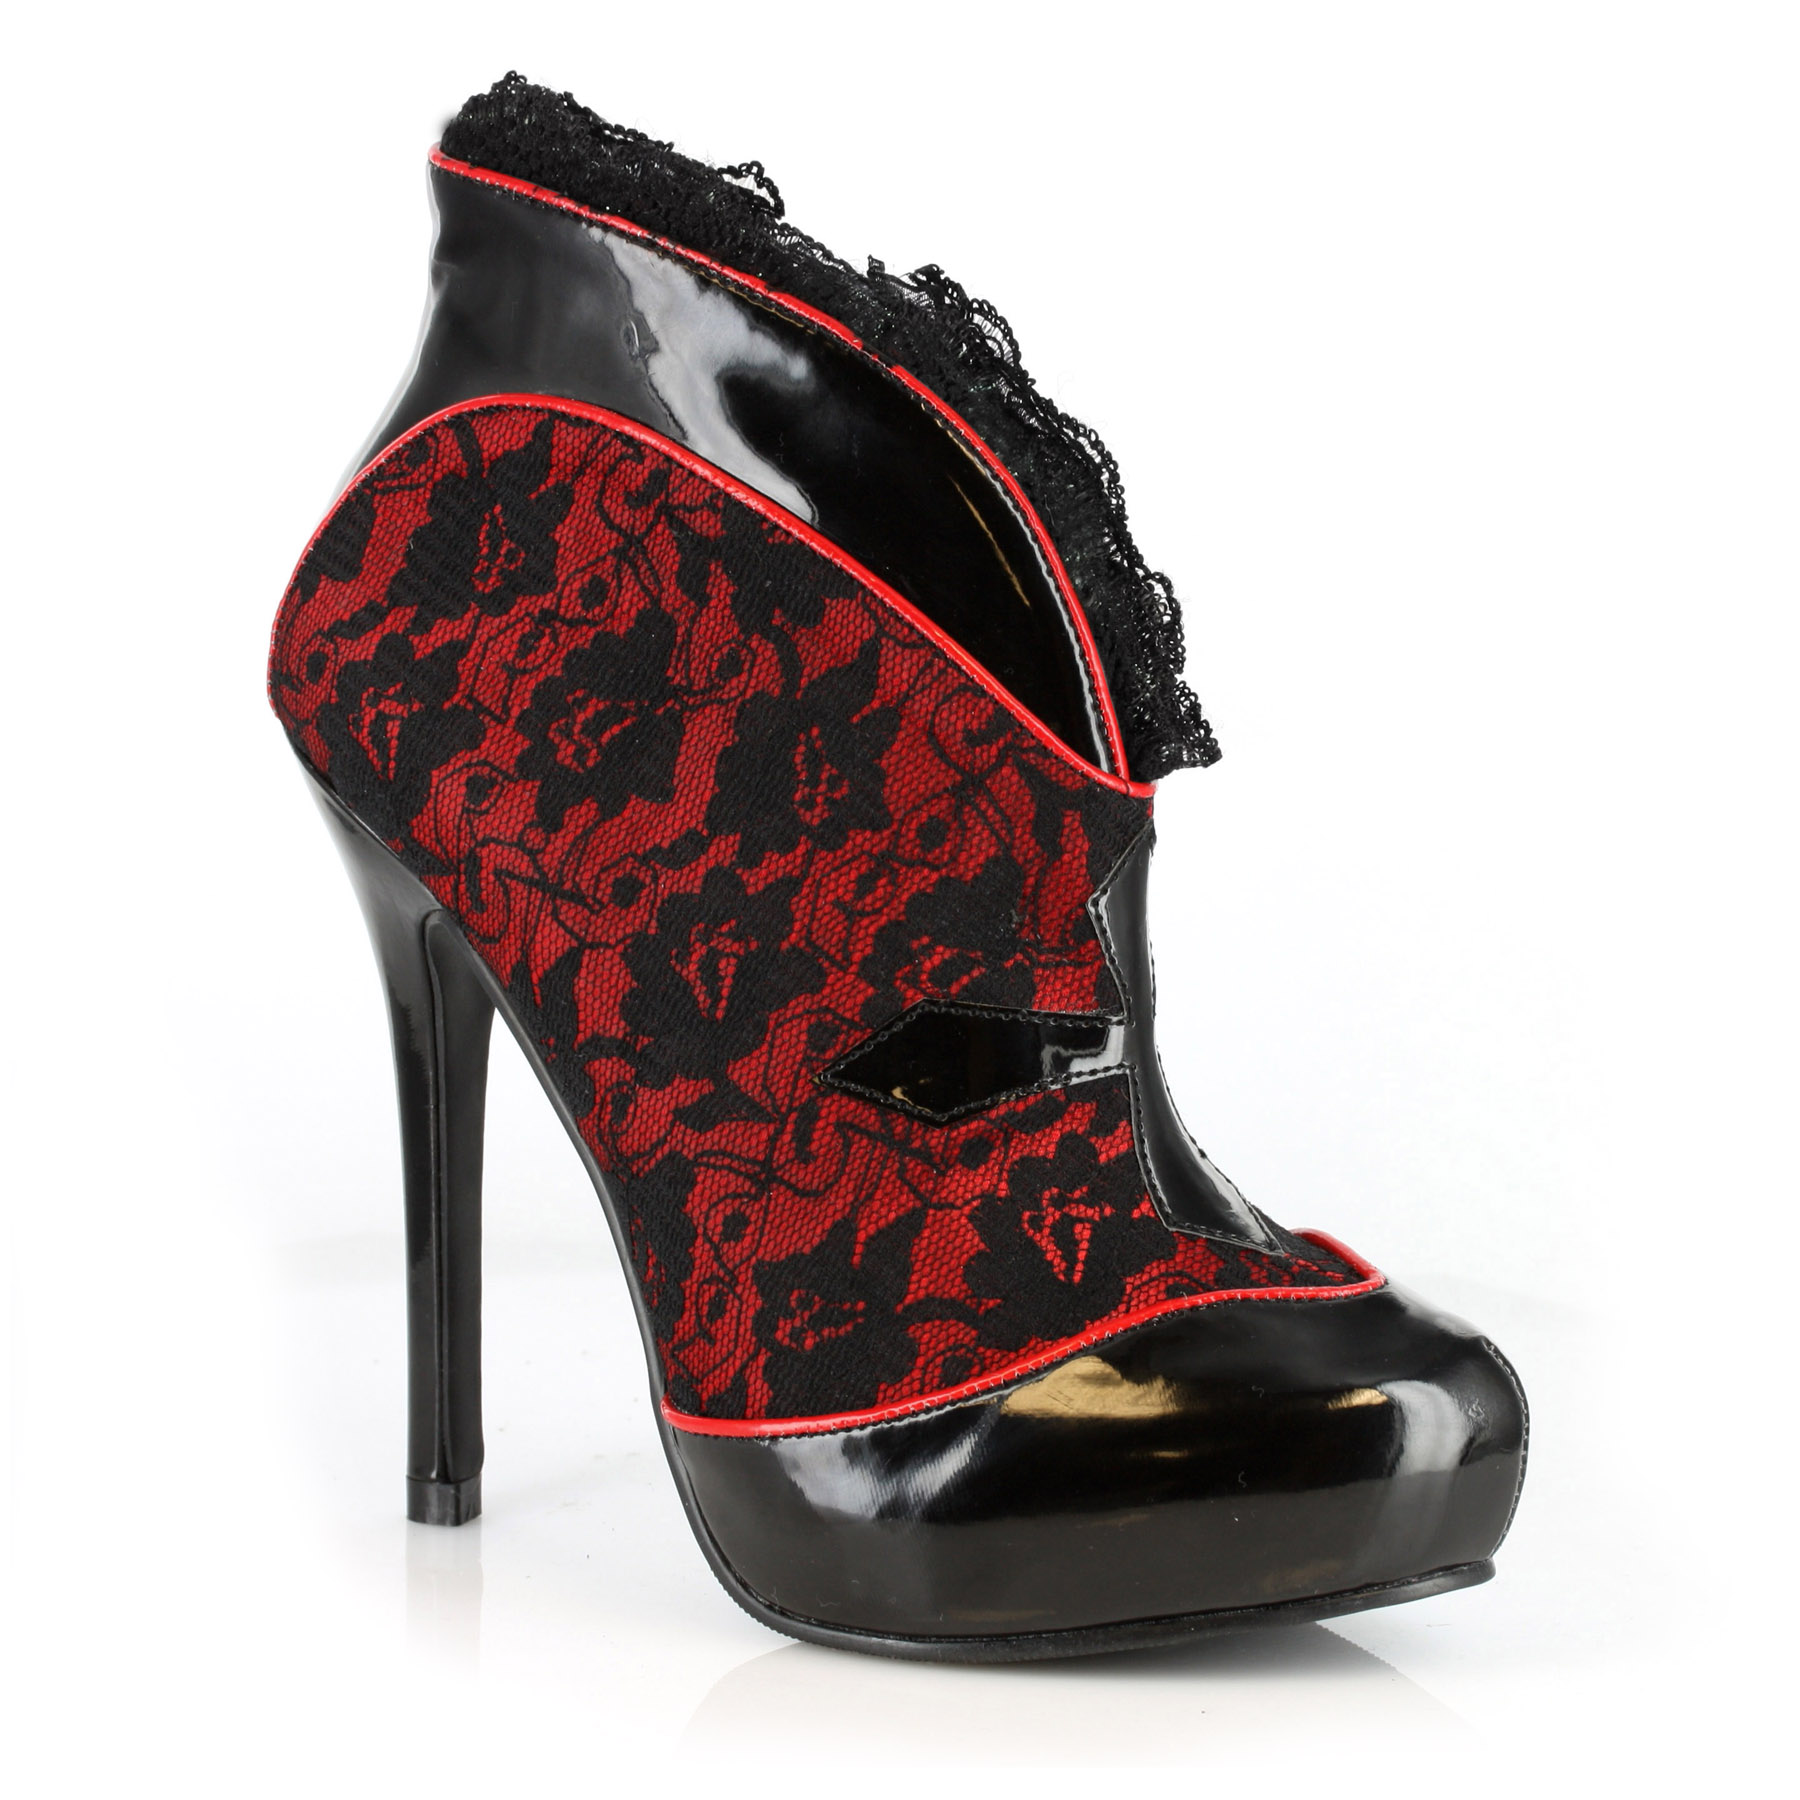 Twilight - 5 Inch Patent and Lace Ankle Bootie